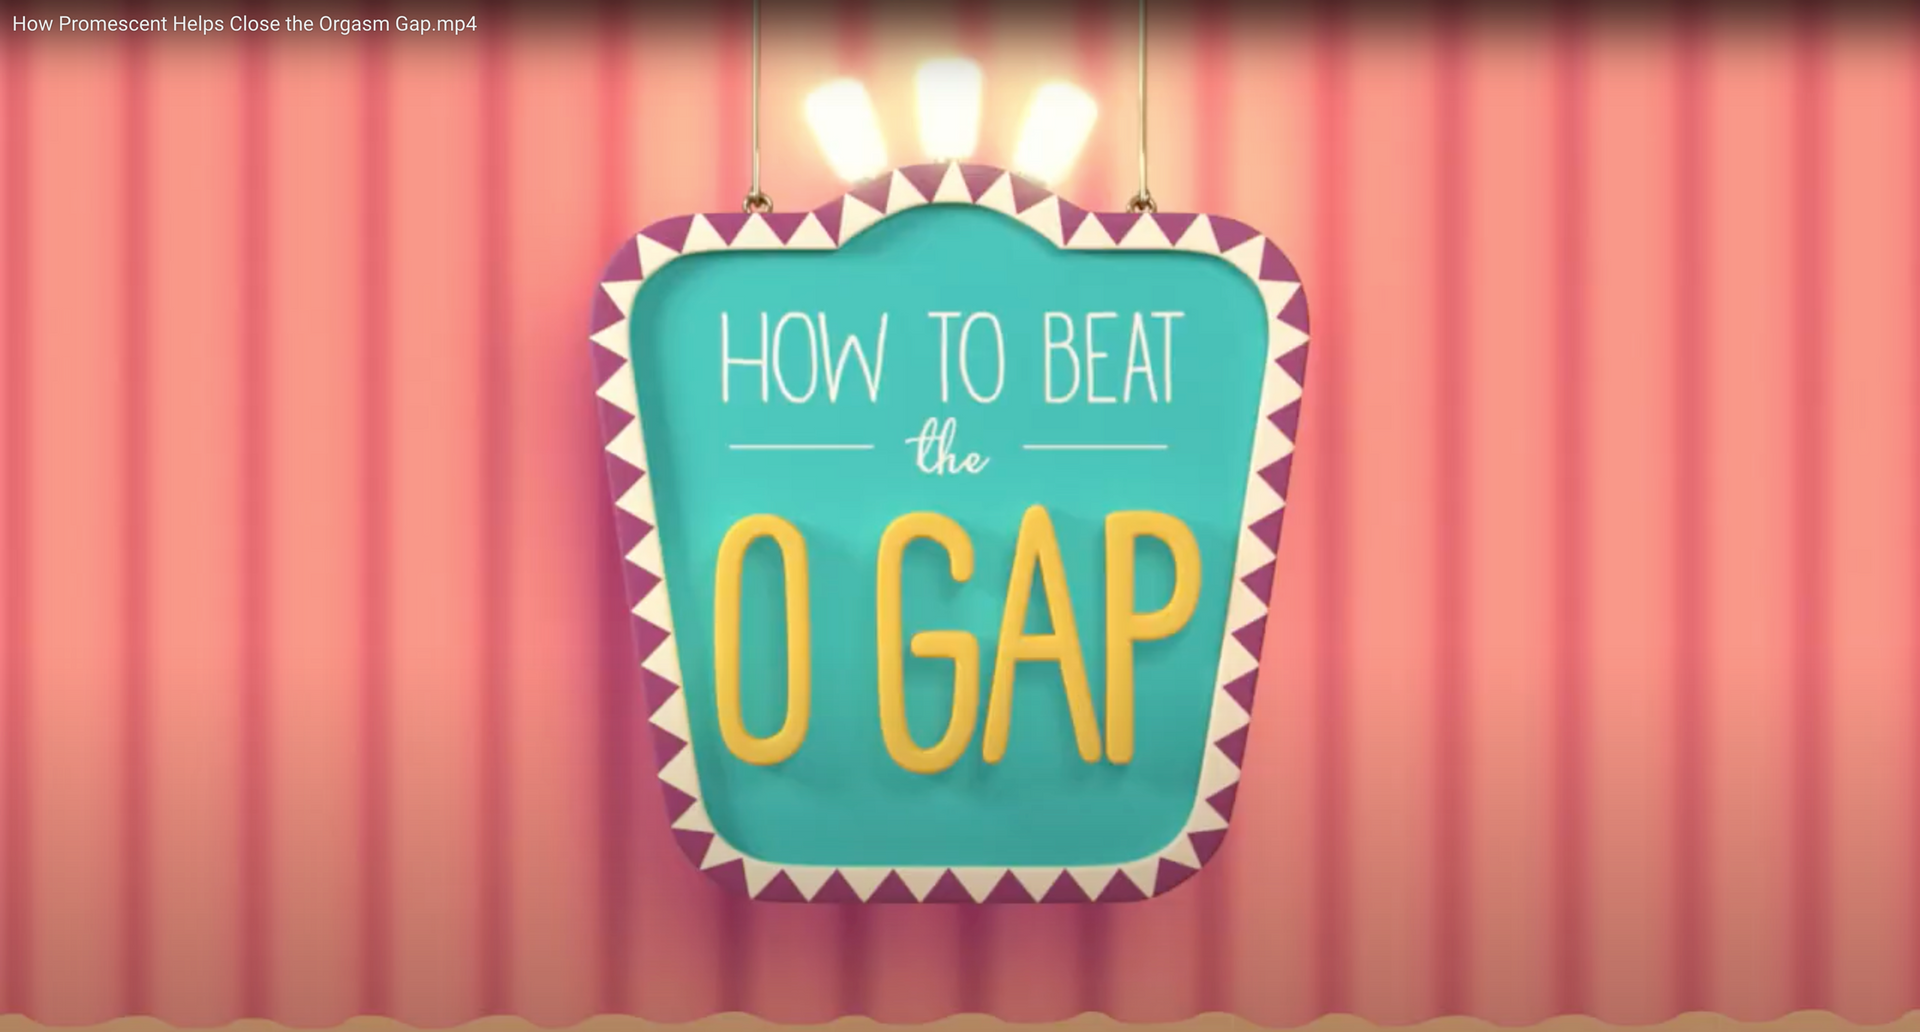 Cargar video: Promescent believes in helping couples make love longer by closing the orgasm gap.